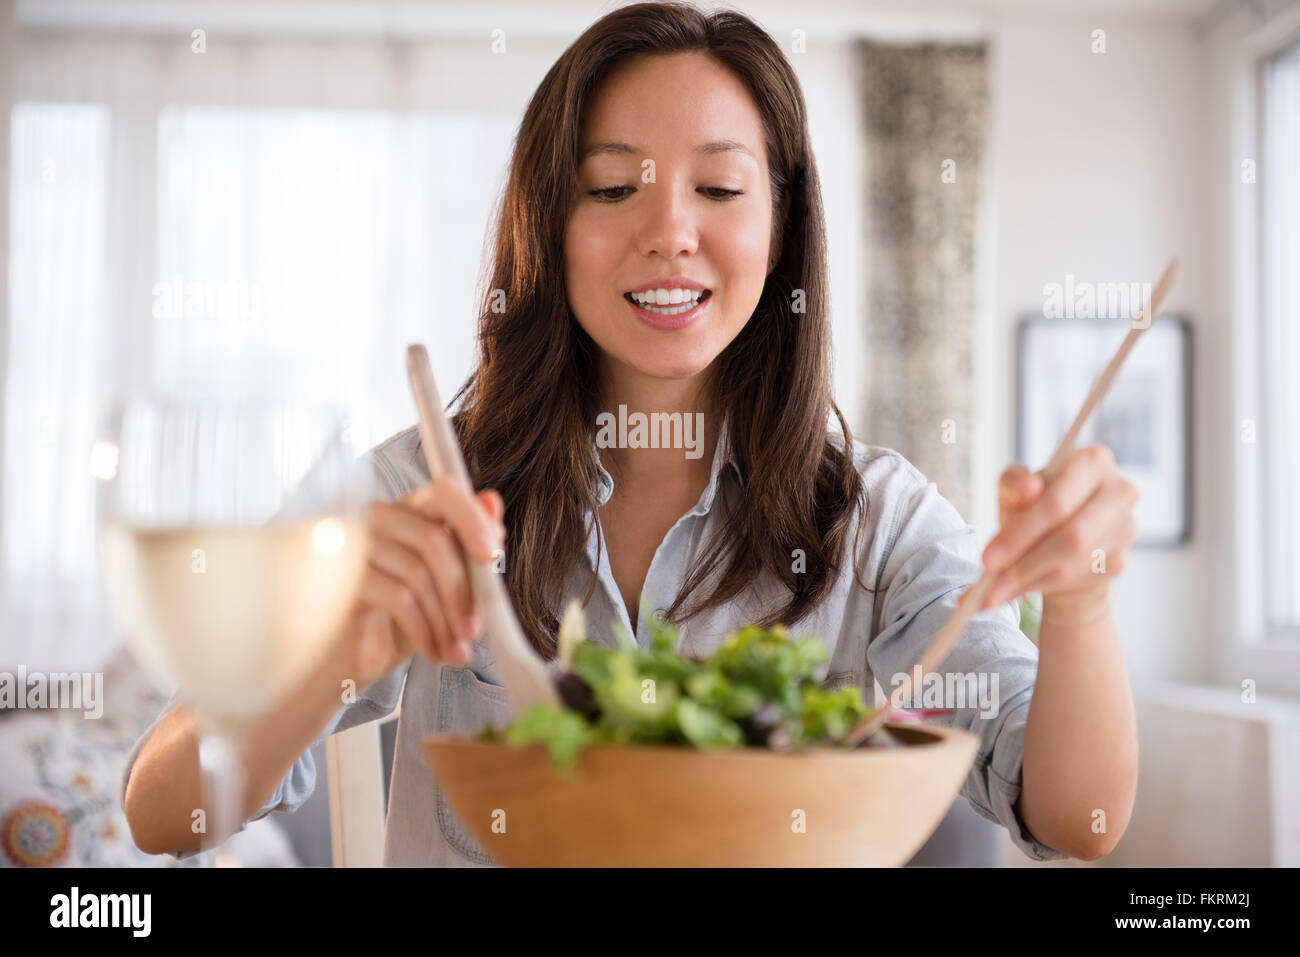 Mixed race woman tossing salad Stock Photo